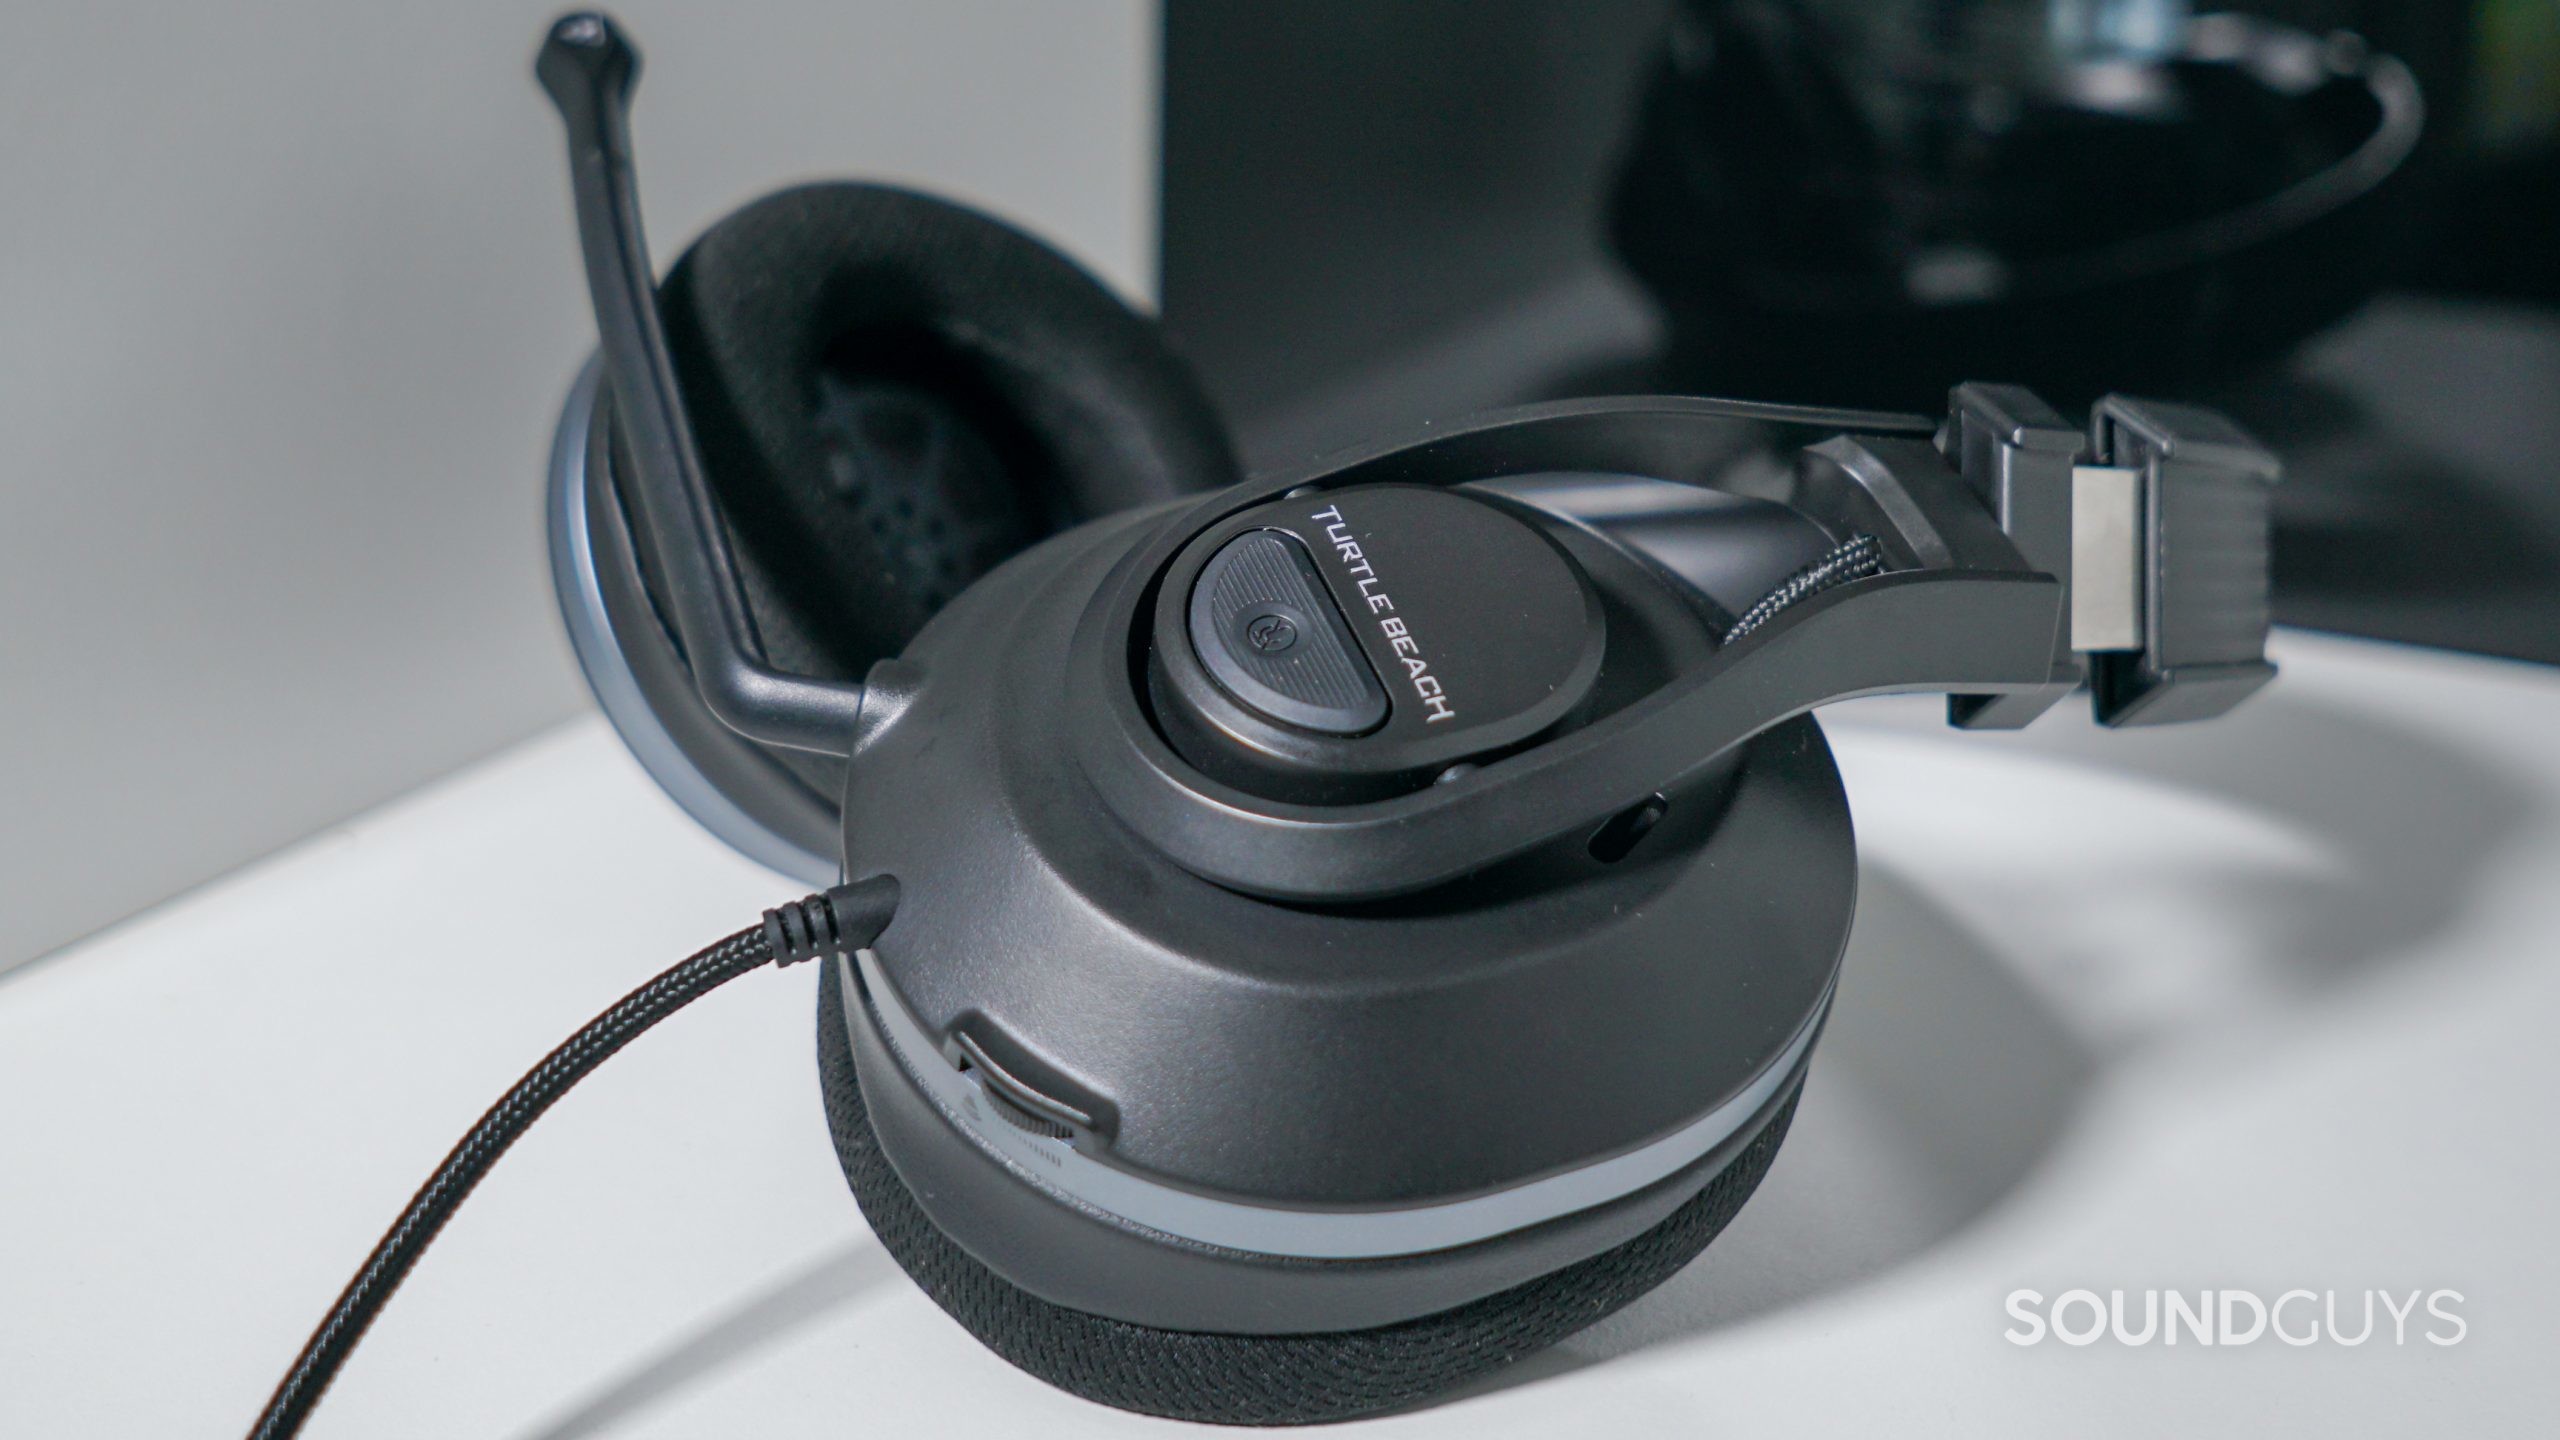 The Turtle Beach Recon 500 lays on a white shelf in front of a reflective black surface.